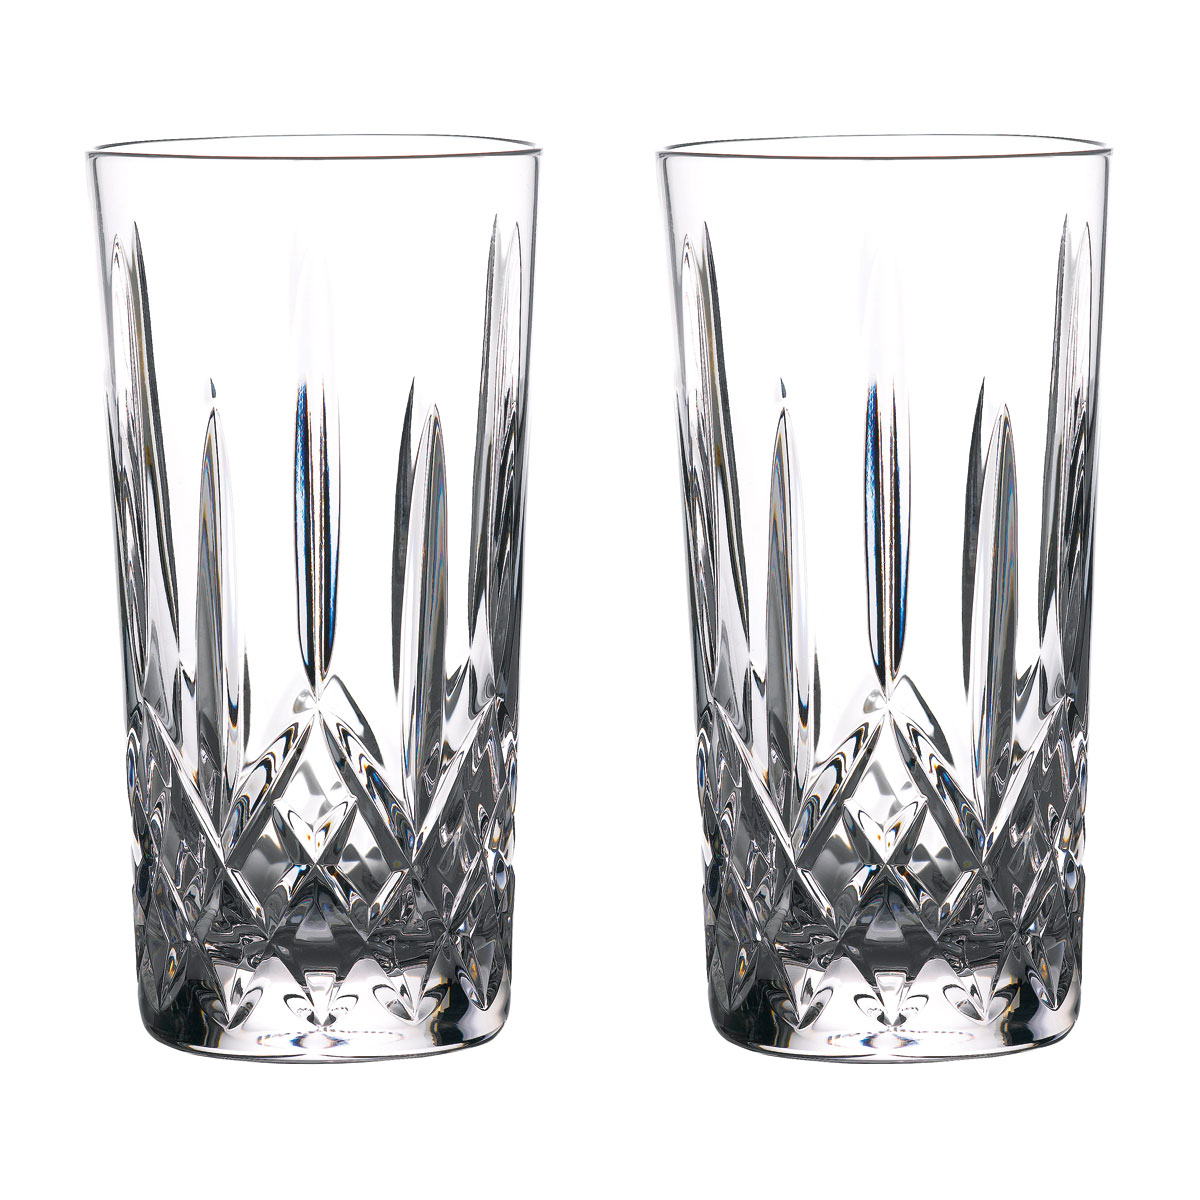 Waterford Crystal Gin Journeys Lismore Hiball Glasses, Pair